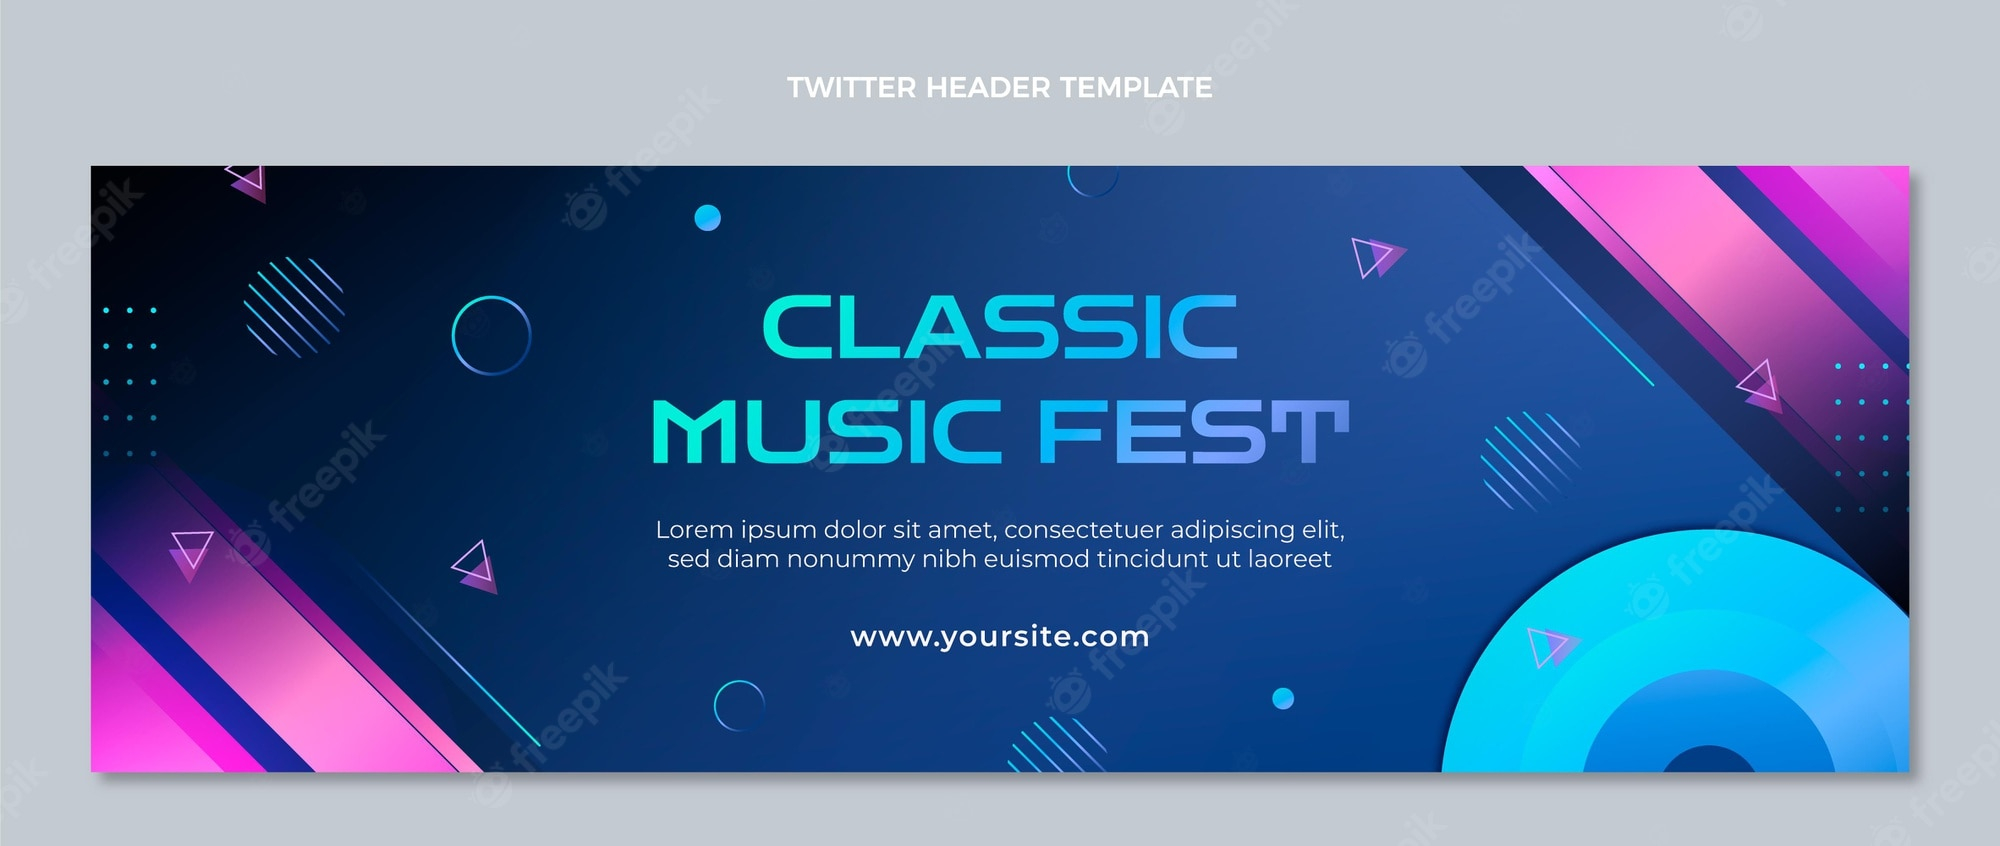 Twitter Cover Images  Free Vectors, Stock Photos & PSD Regarding Twitter Banner Template Psd